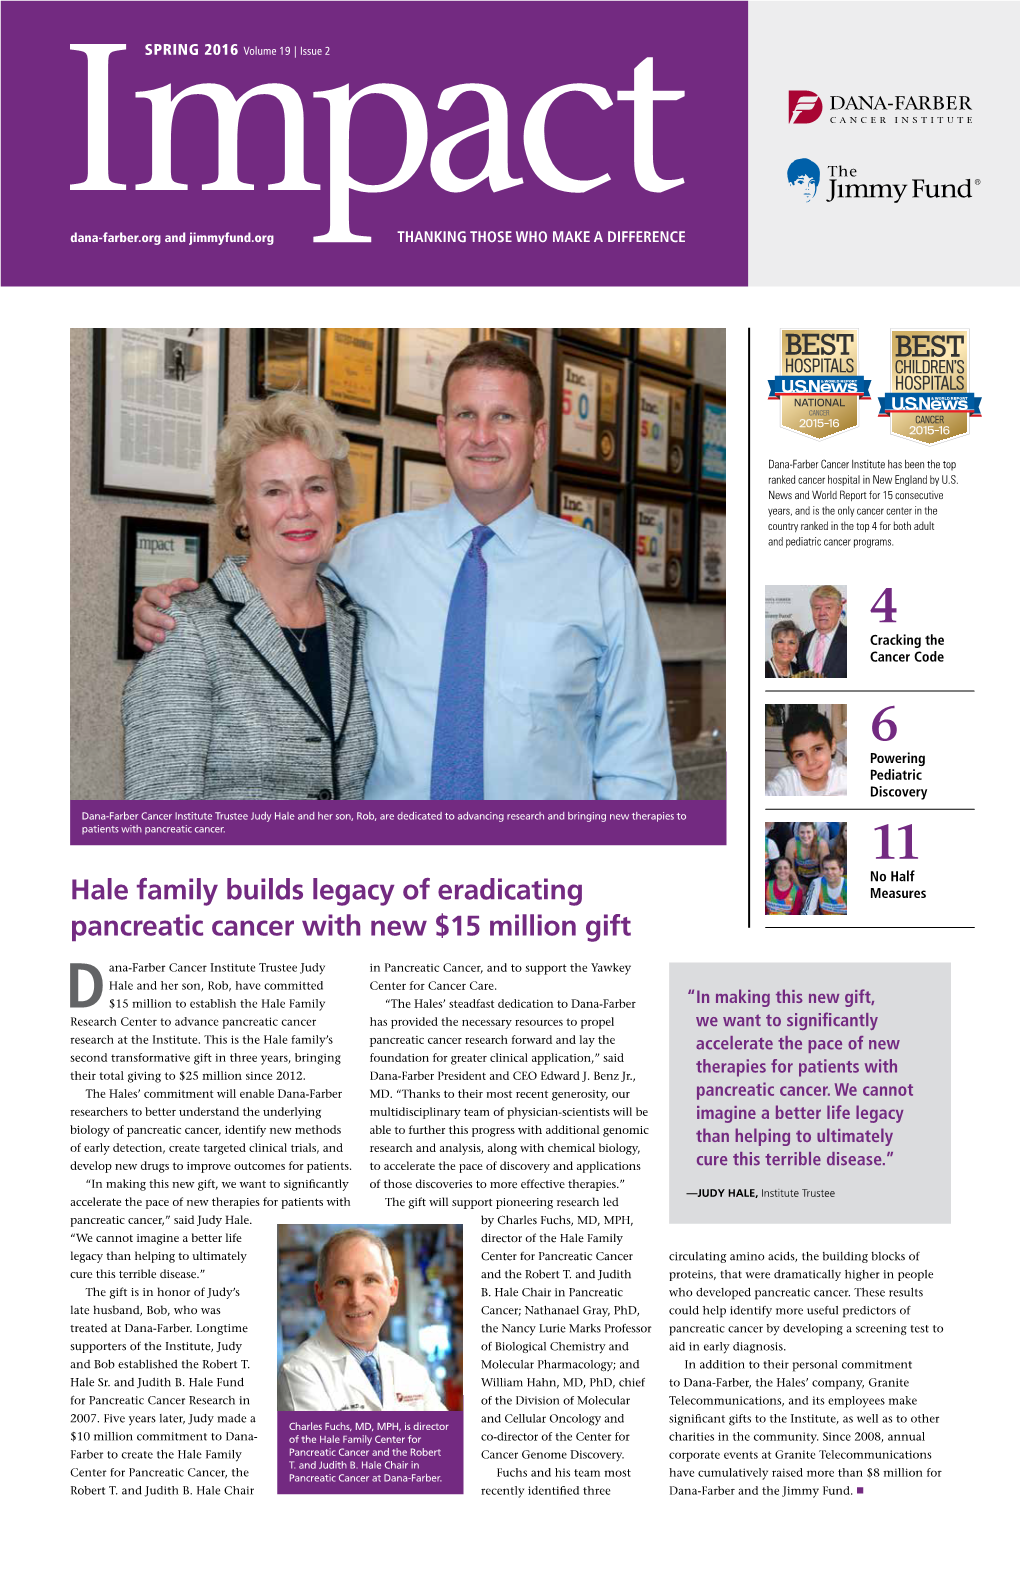 Hale Family Builds Legacy of Eradicating Pancreatic Cancer With